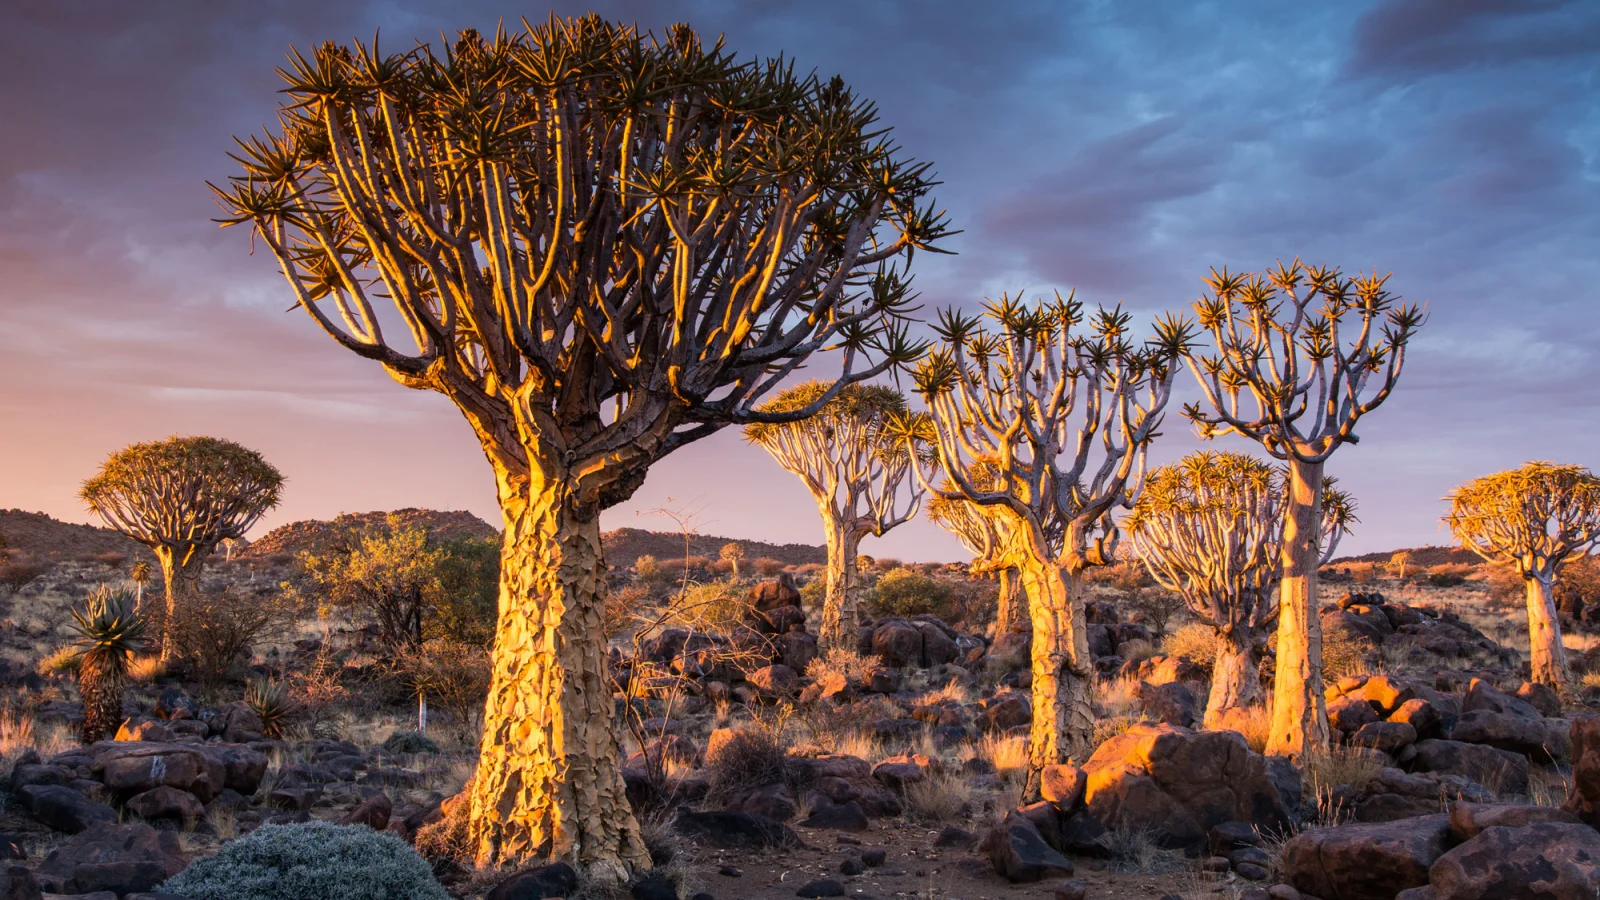 Namibia - Quiver Trees - Africa